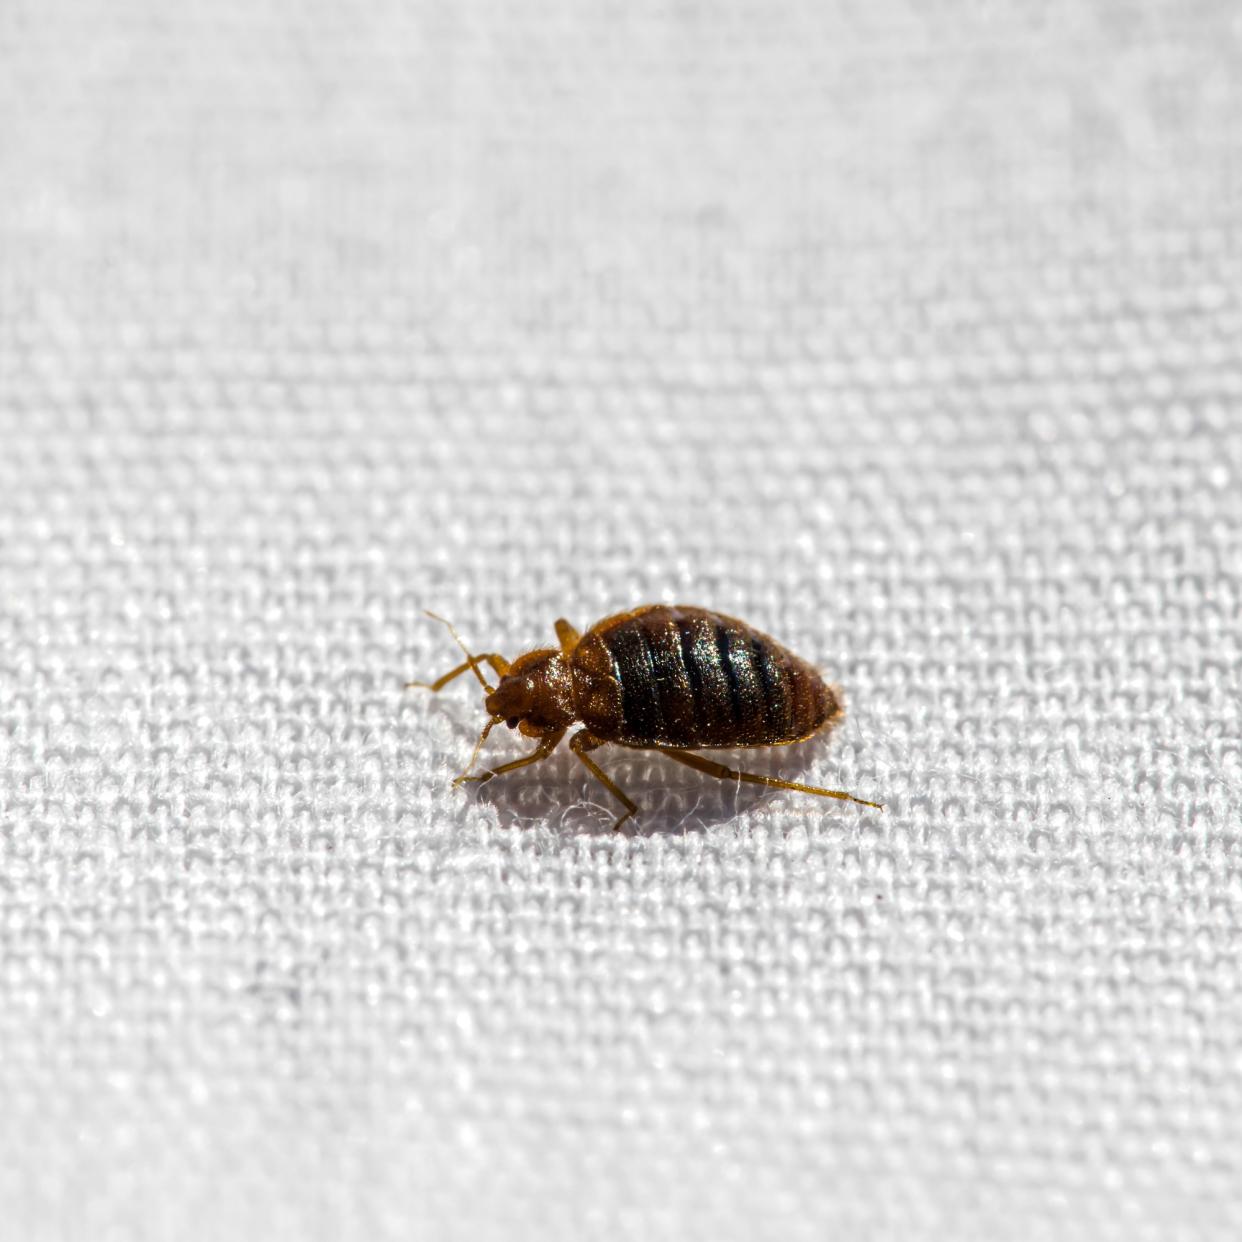 The UK is facing a bed bug epidemic experts explain why outbreaks are